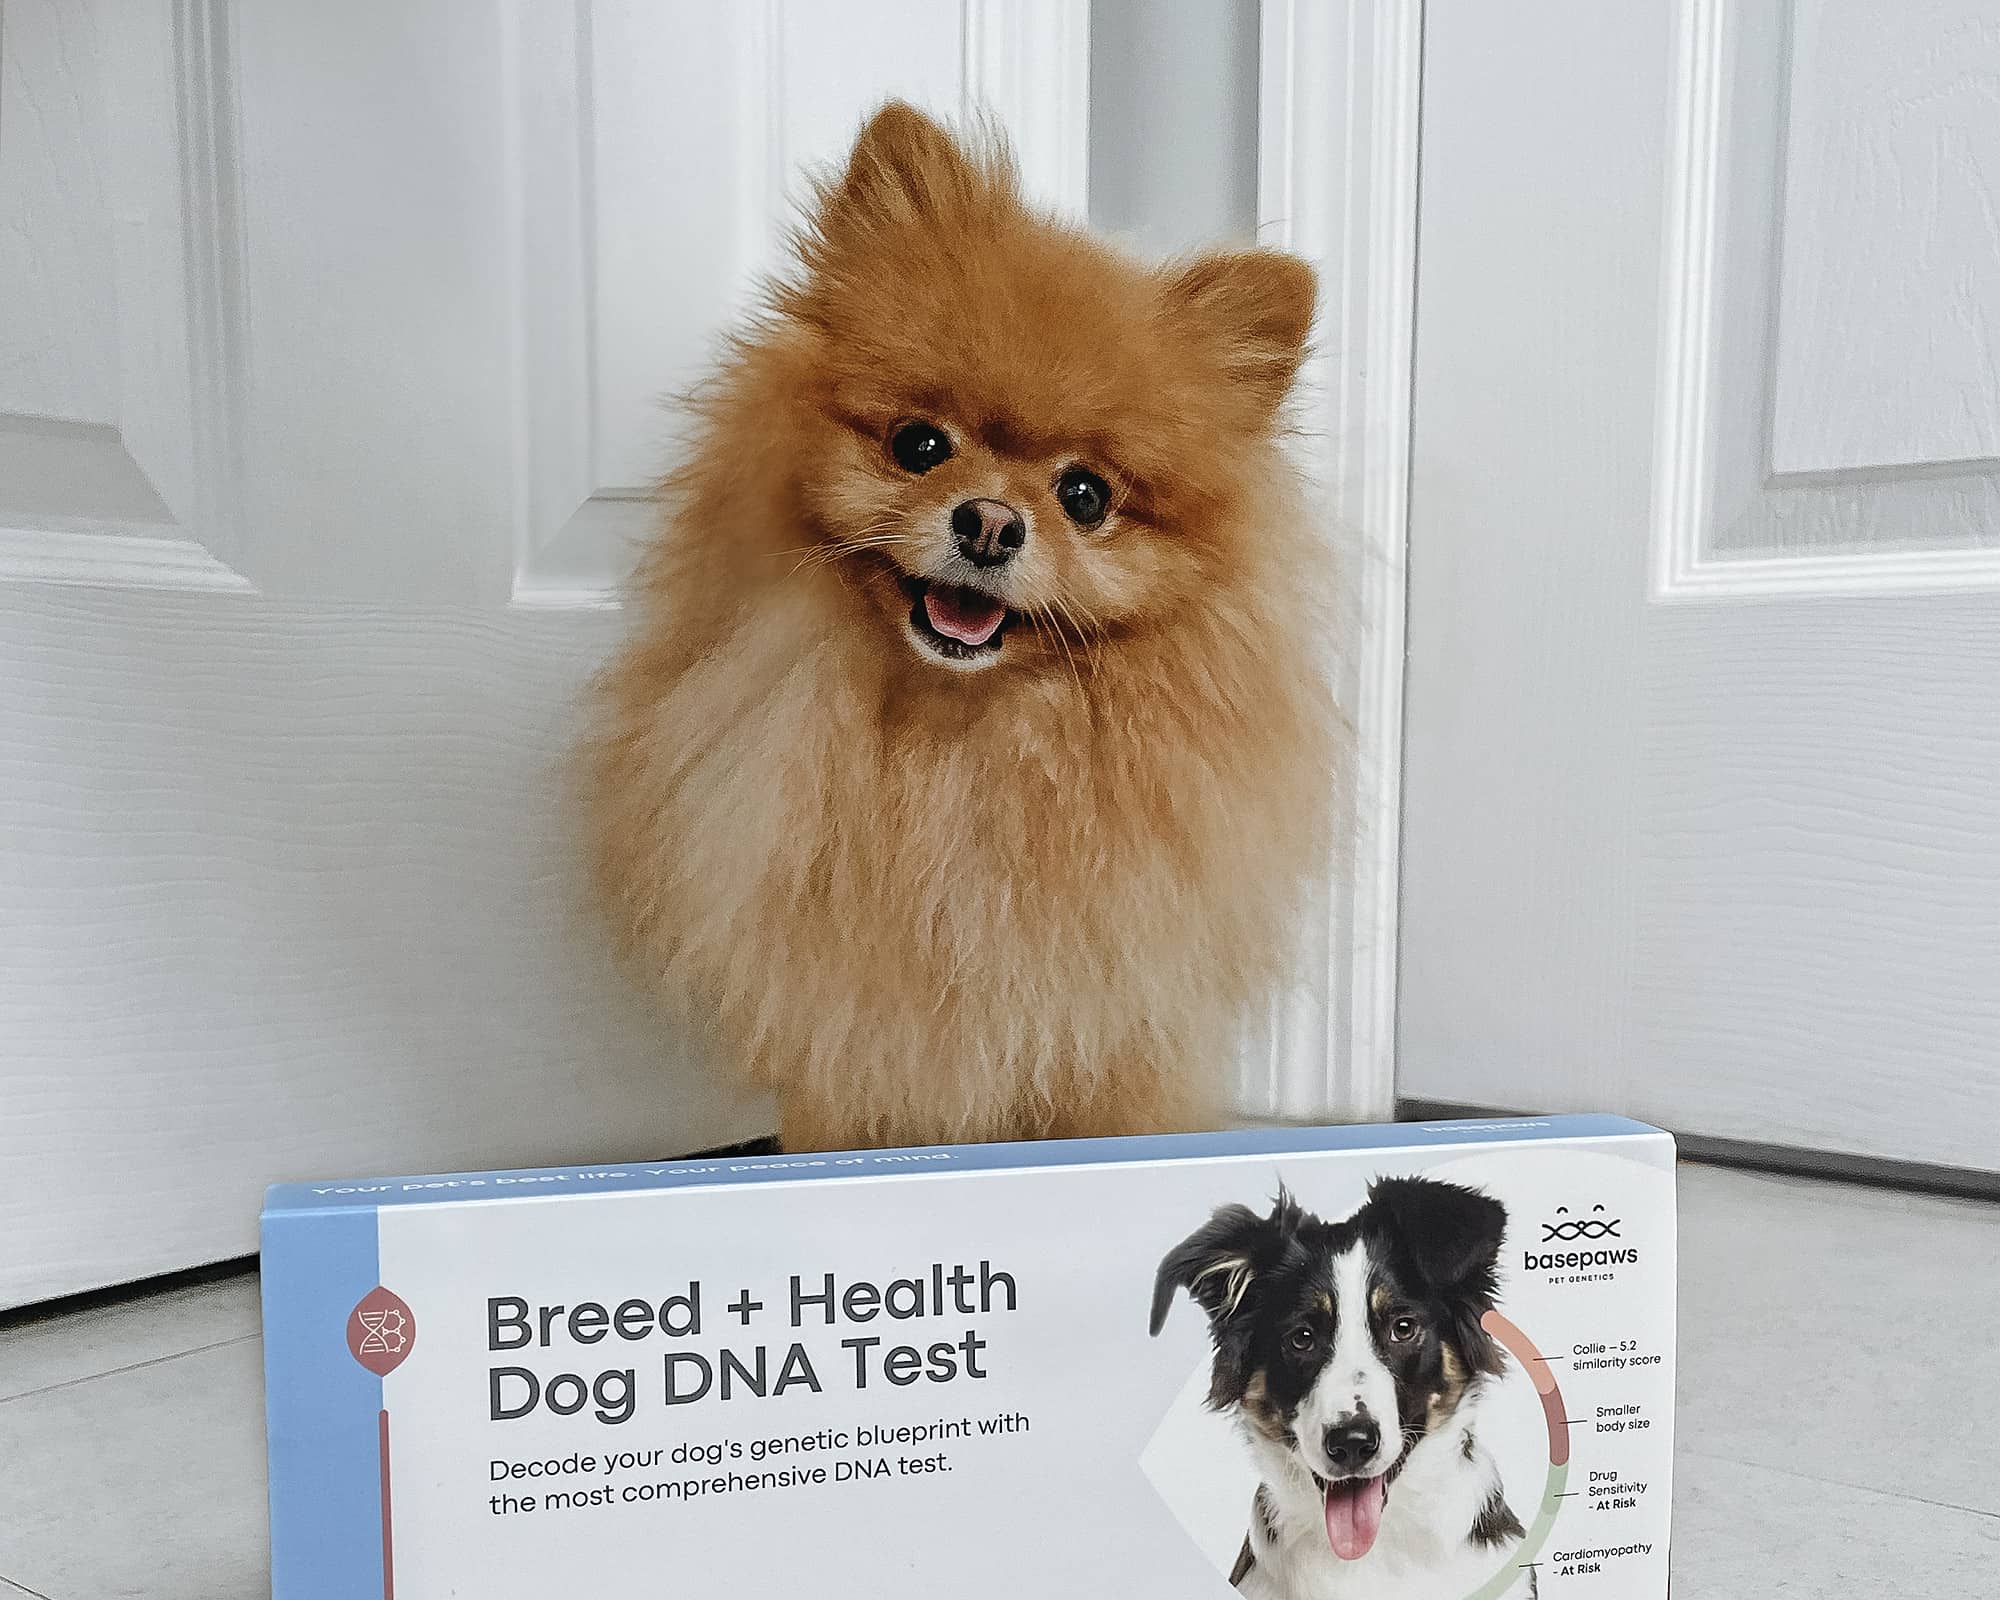 Basepaws breed and health dna test